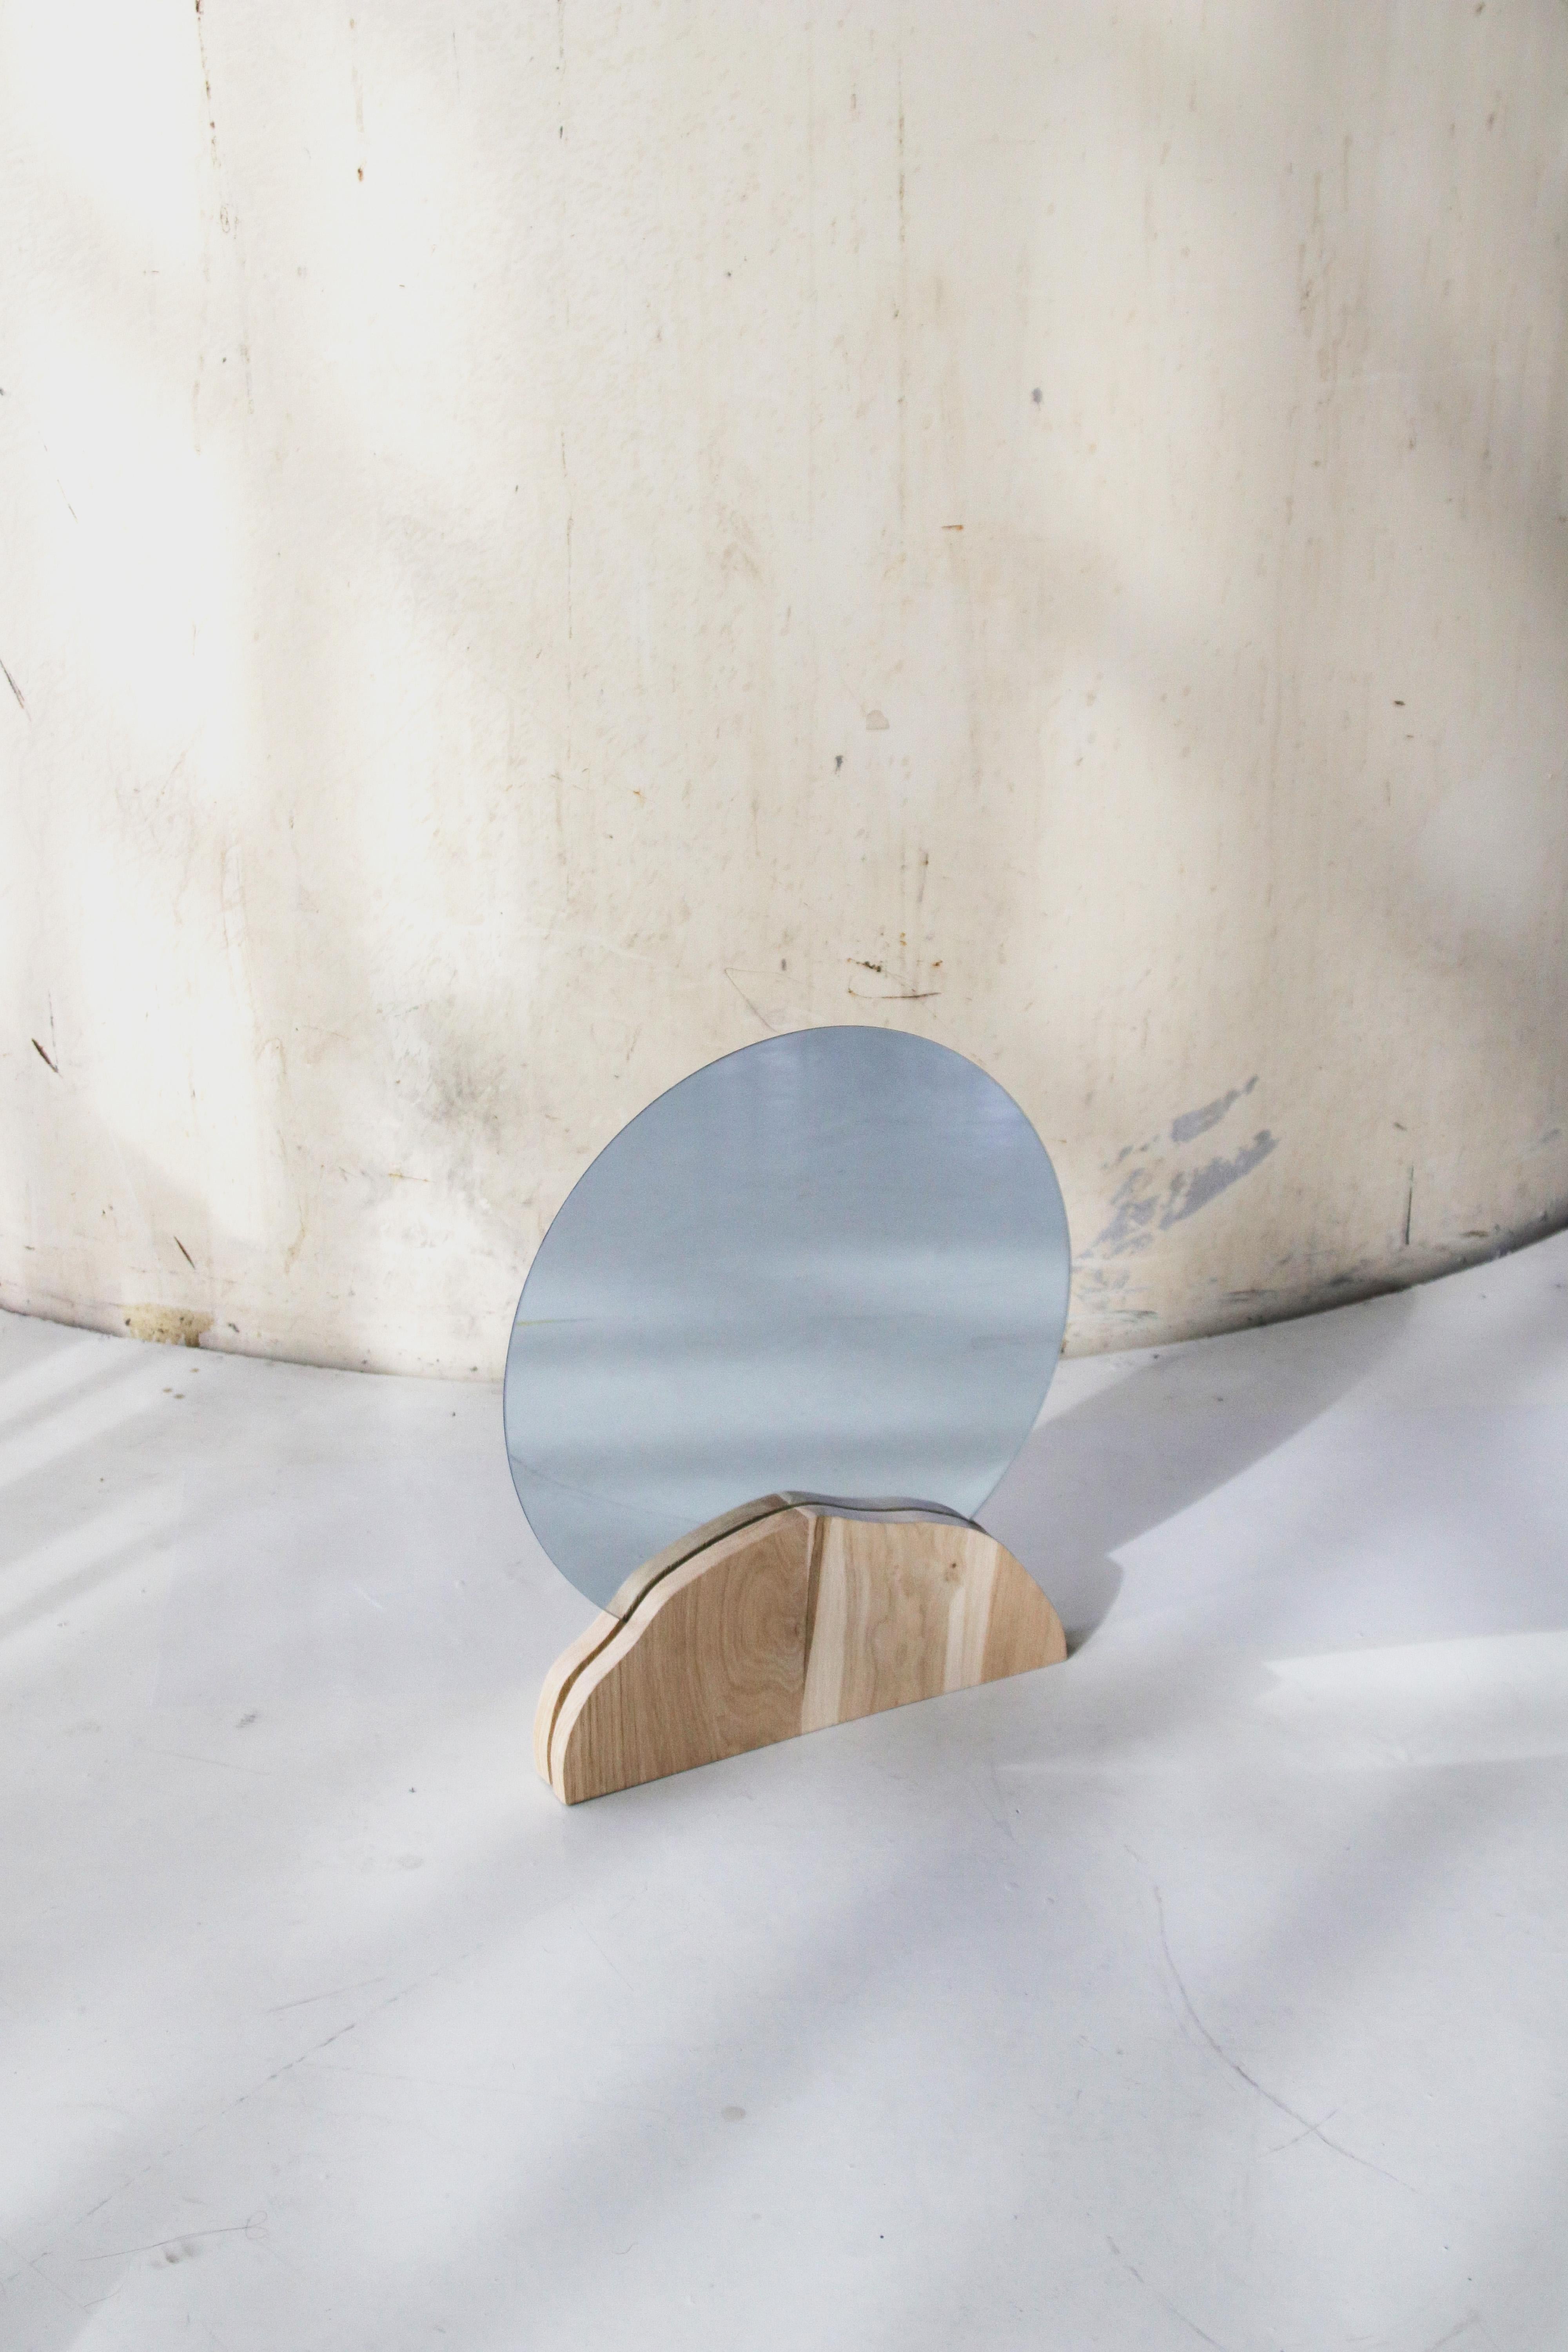 Dune mirror by Alice Lahana Studio
Every mirror is unique.
Dimensions: 42 x 55 cm
Materials: Oak.

Shaped by hand, the oak base hugs a large round mirror.

Alice Lahana is a french designer based in Paris. While studying at Ensba, she moved